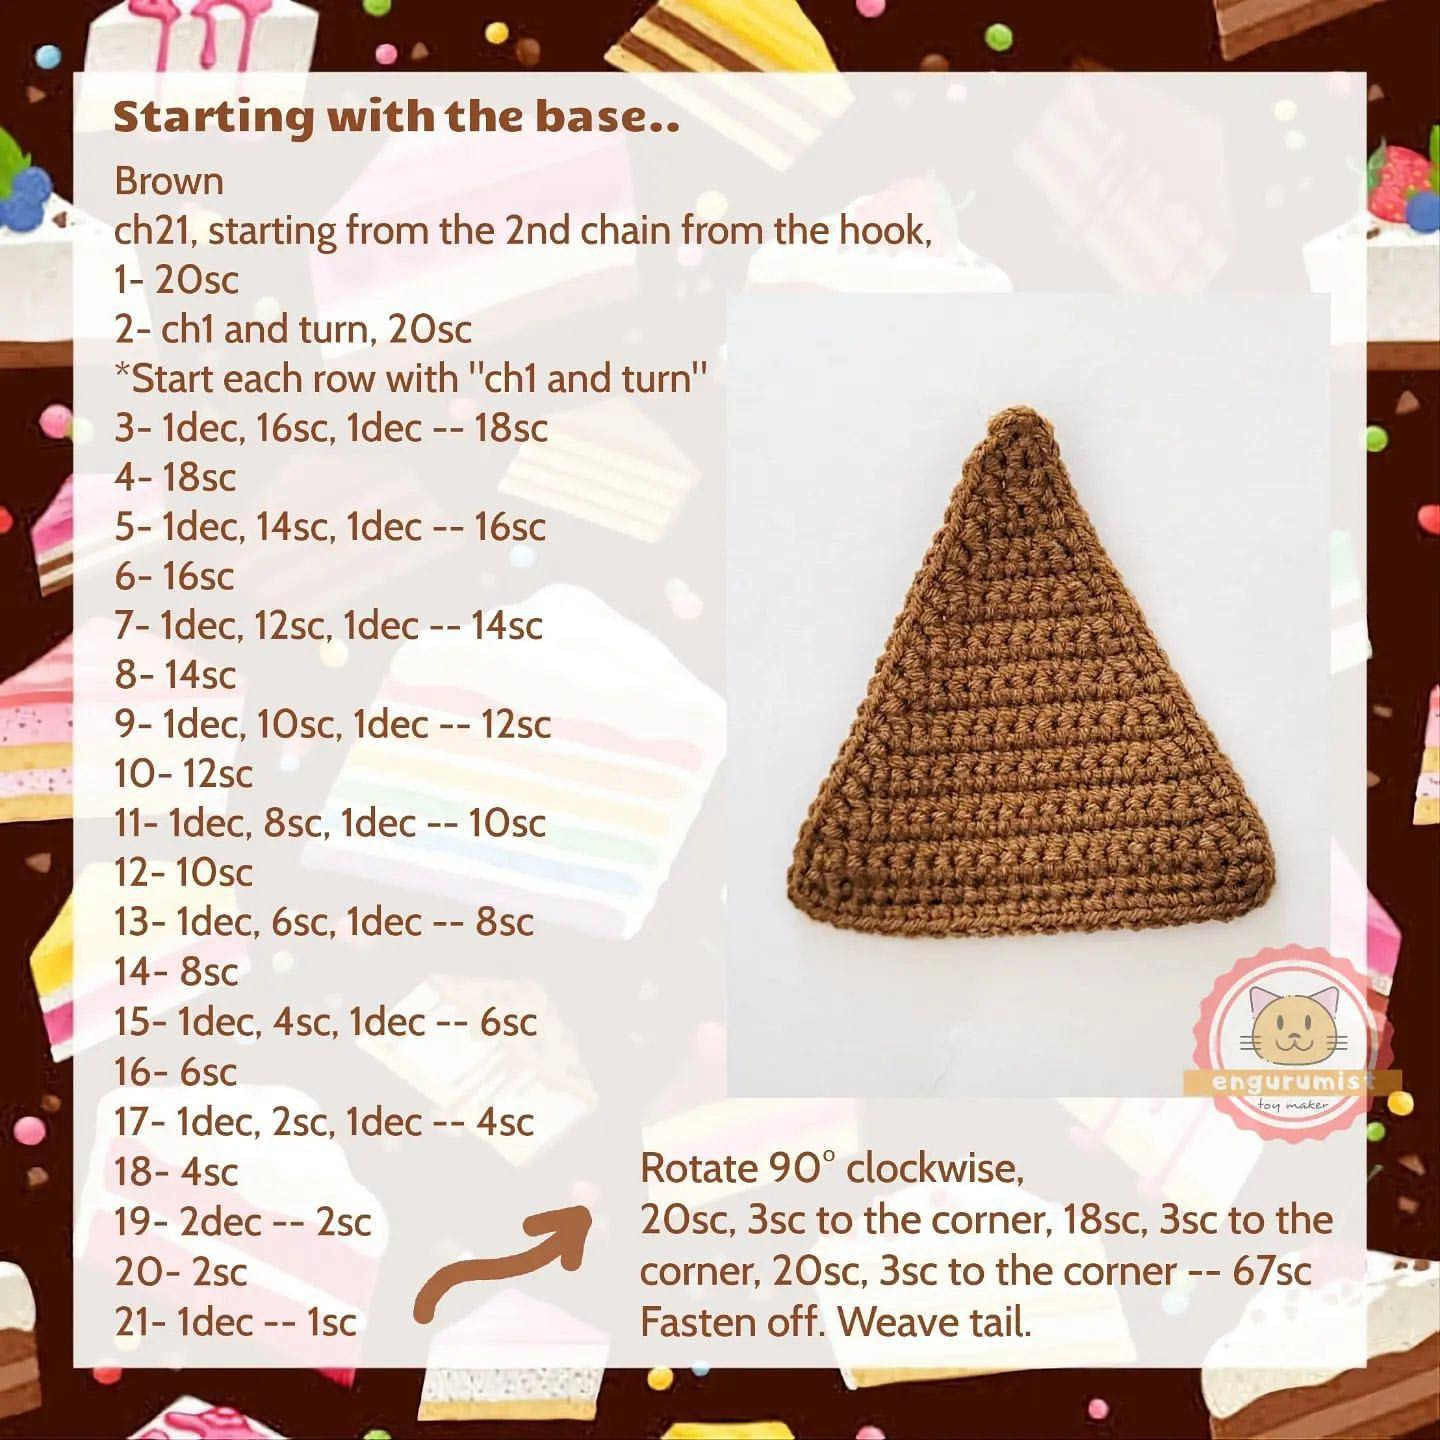 piece cake free pattern contains lost of love and friendship